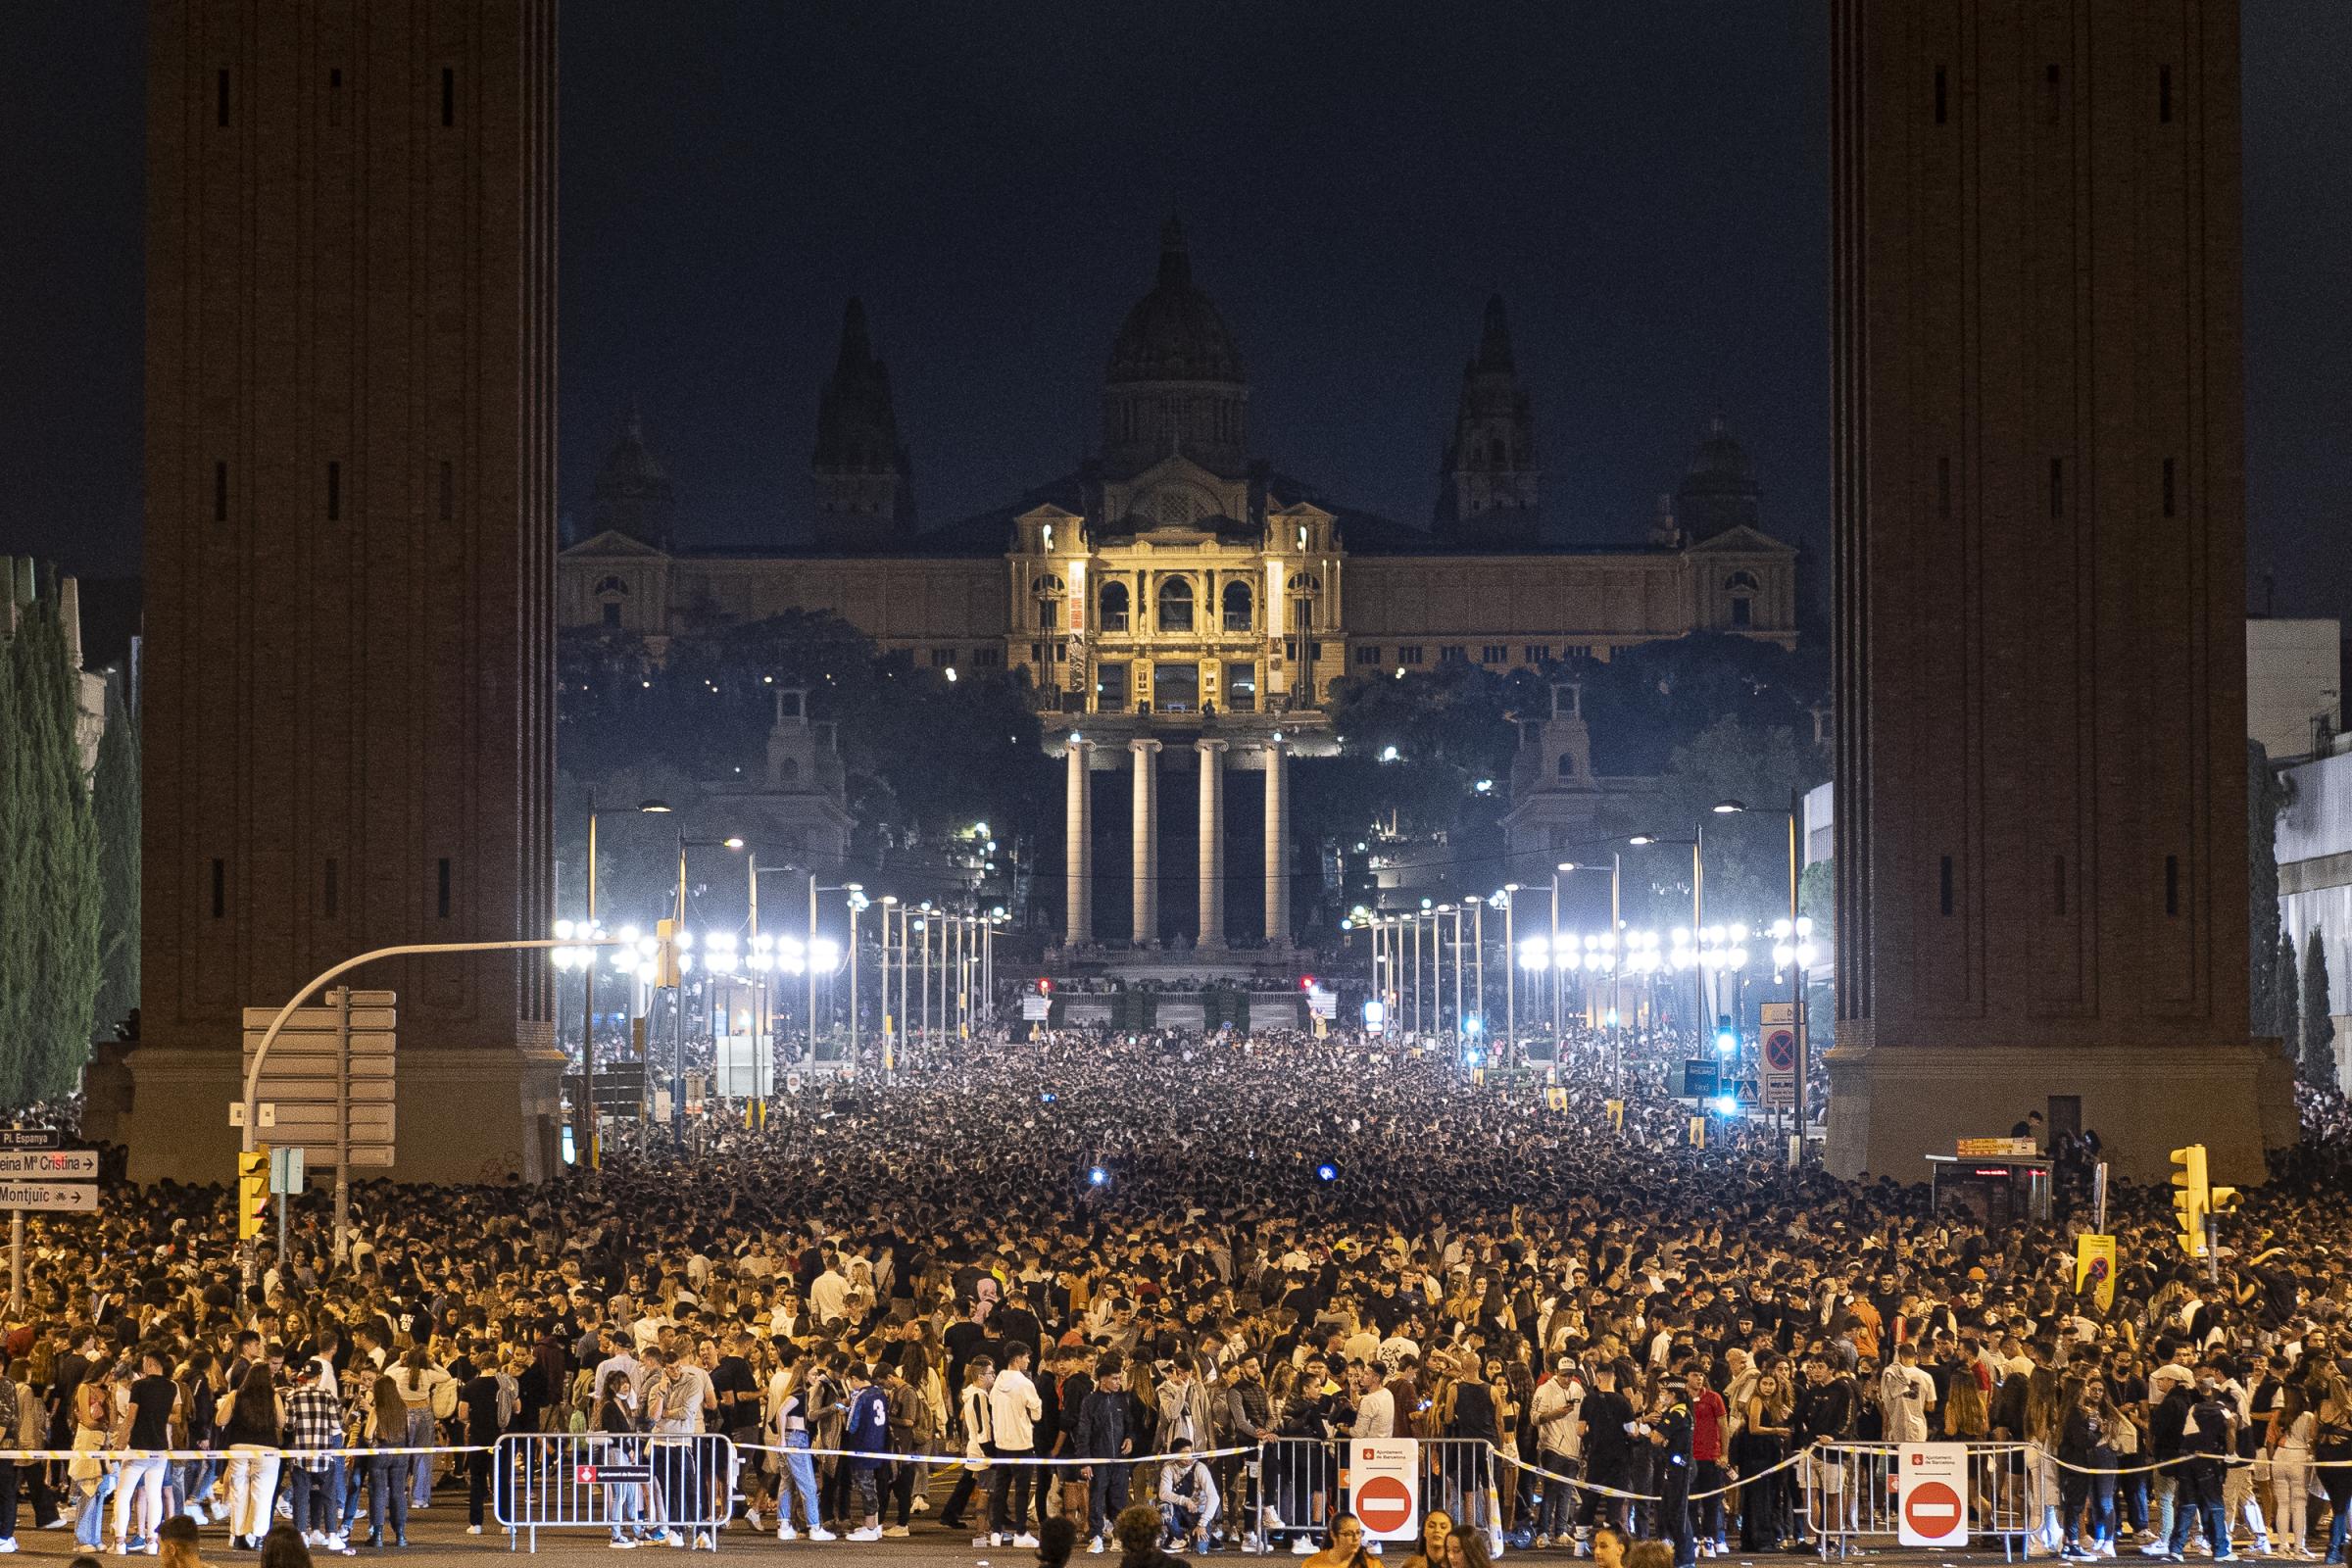 The Mercè's massive boozings: images of the incidents in Barcelona - Some forty thousand people gathered on Reina Maria...